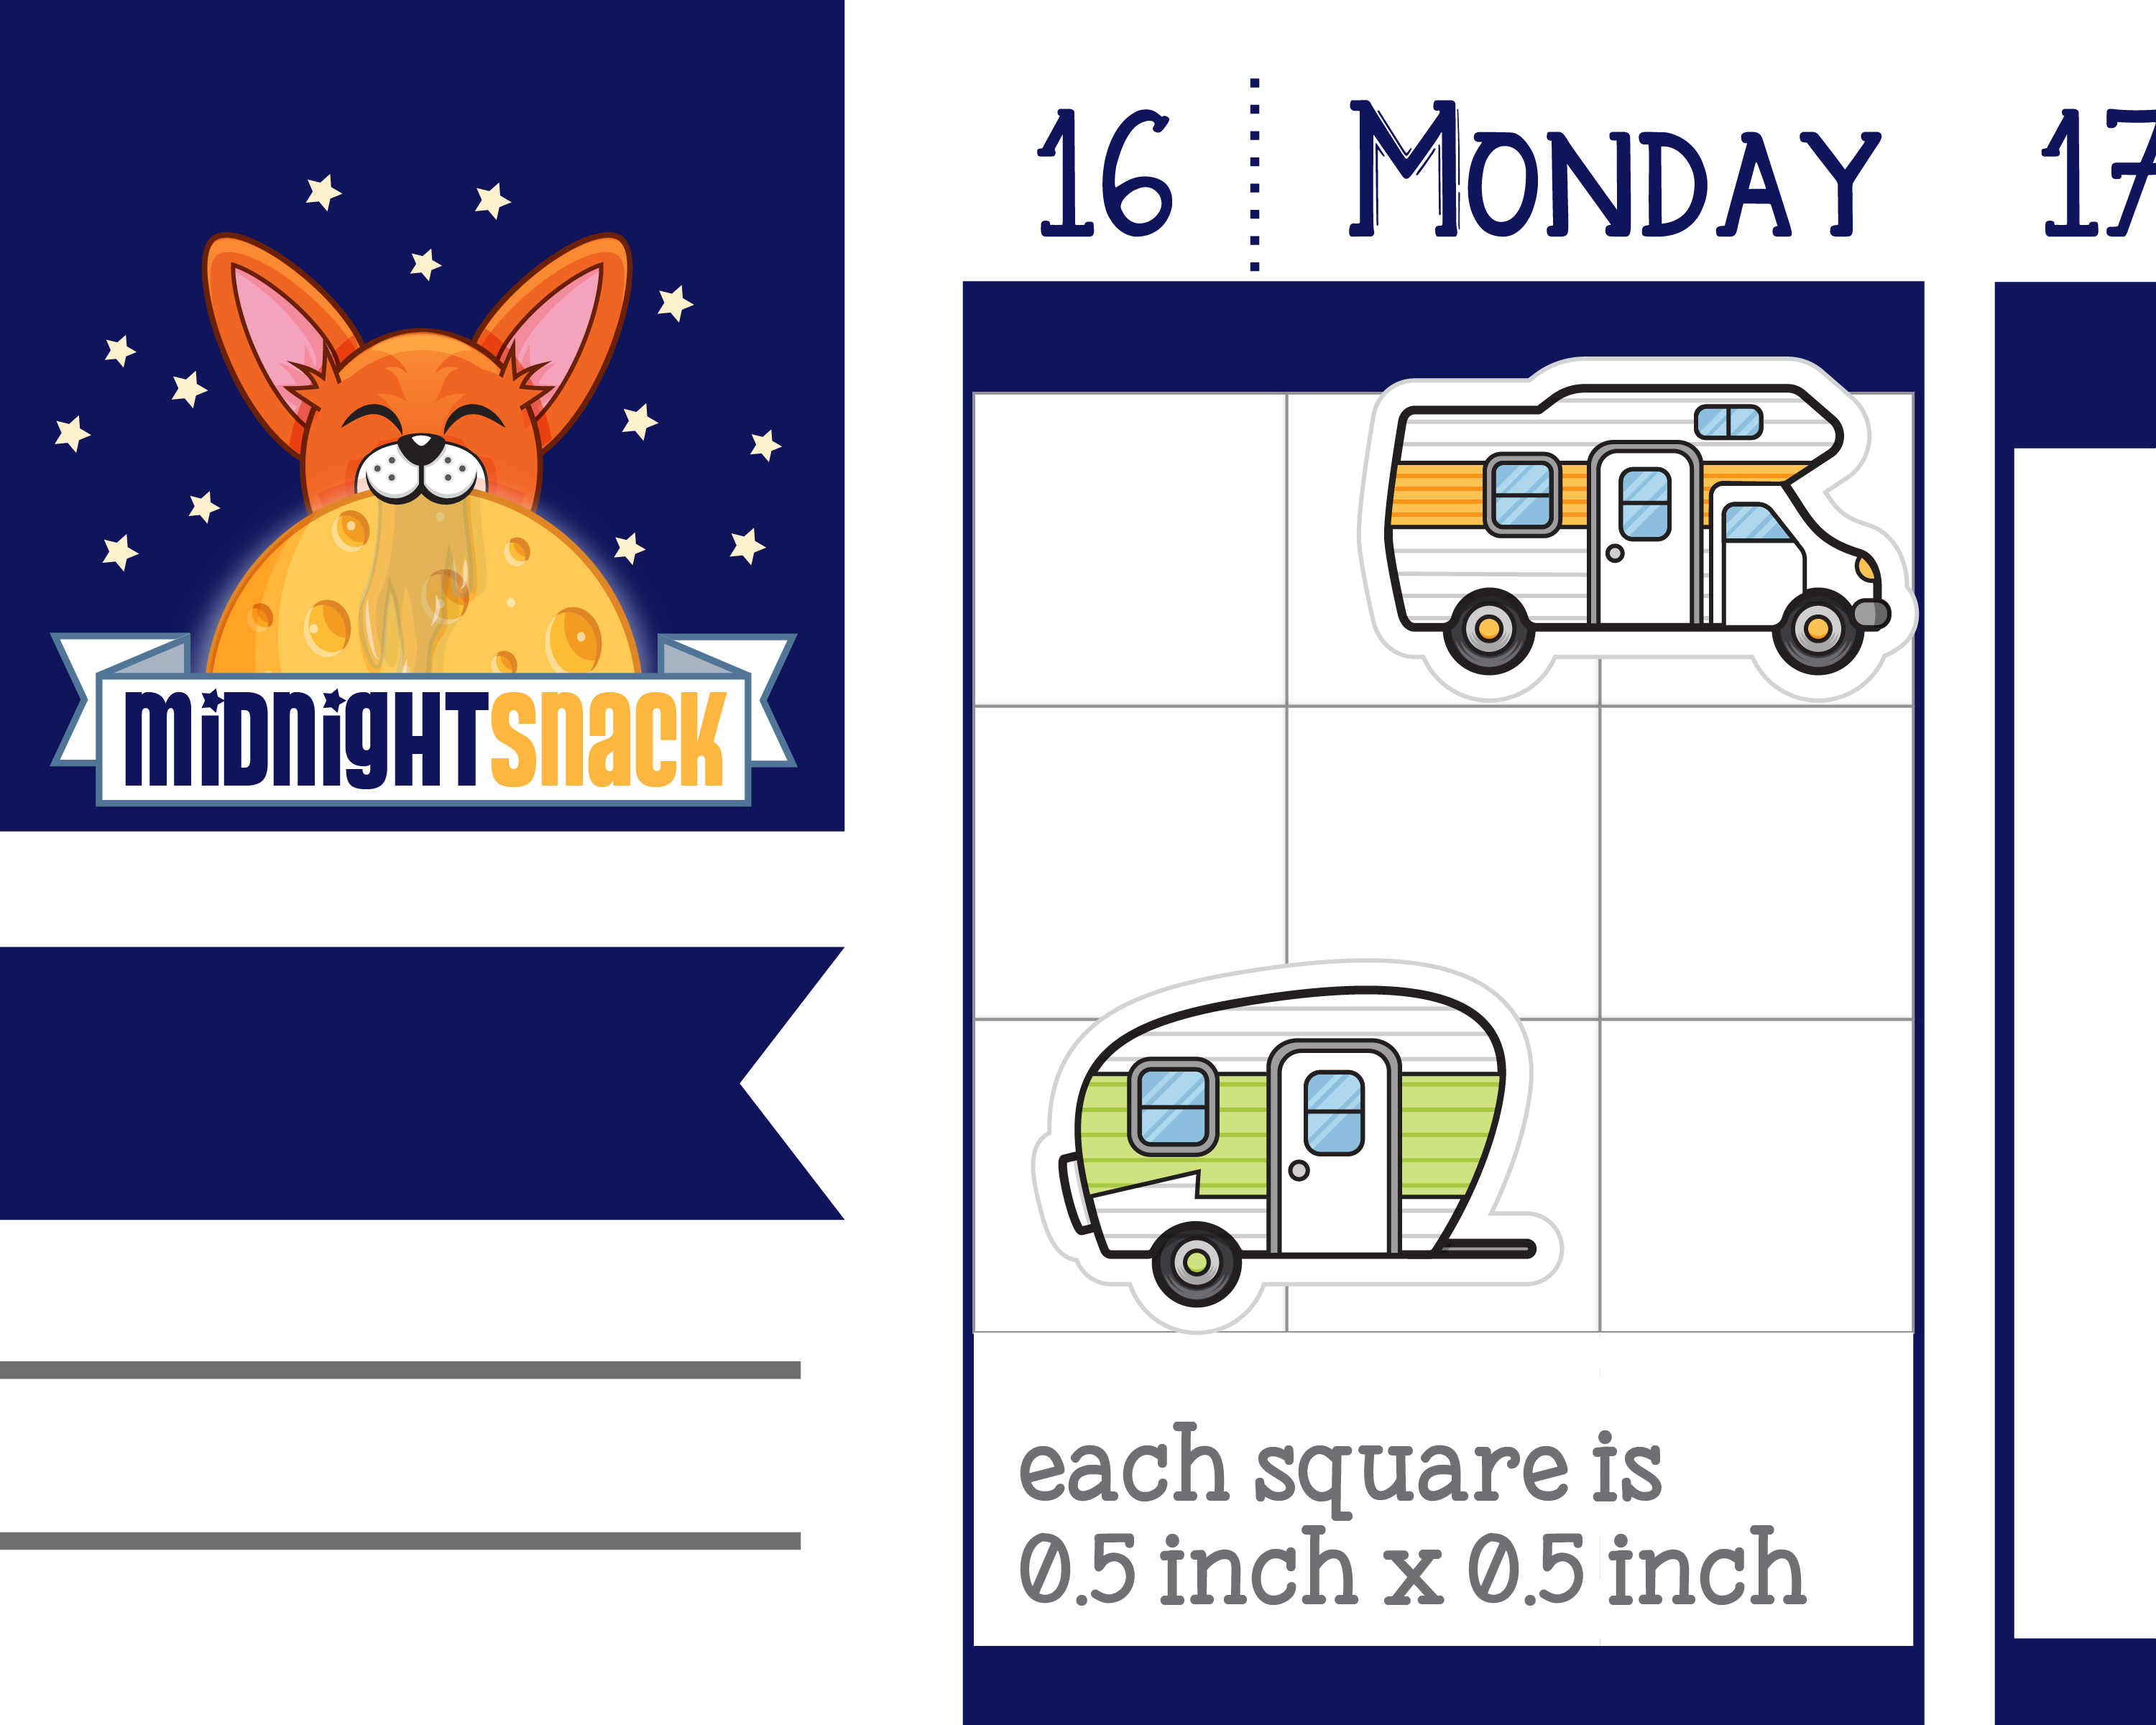 RV or Trailer Icon: Camping Trip Planner Stickers Midnight Snack Planner